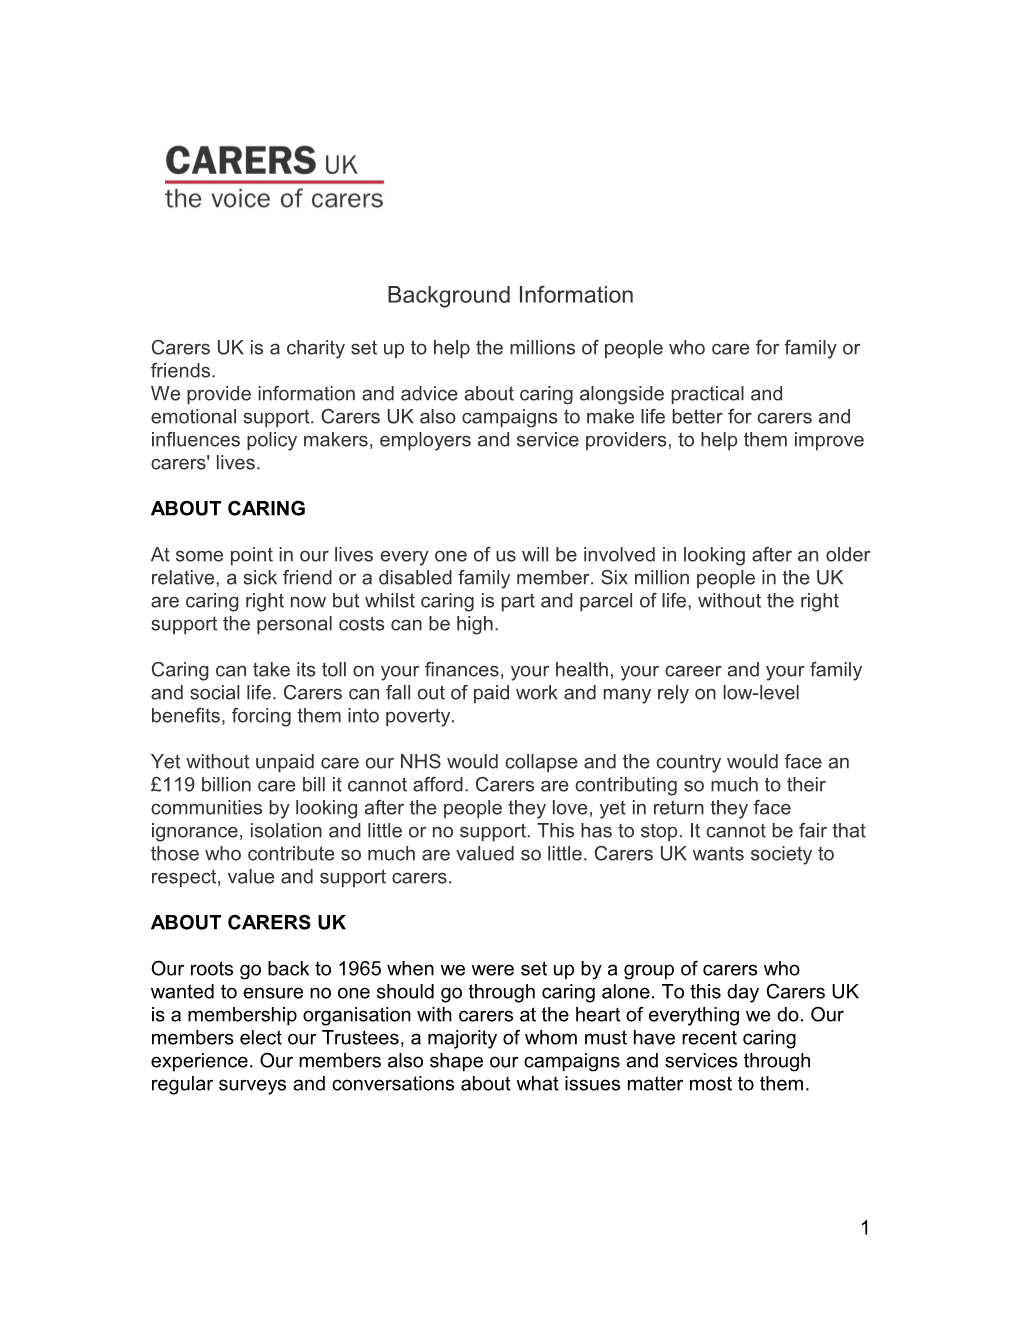 Carers UK Is a Dynamic Charity That Has a Reputation of One Being of the Best Campaigners